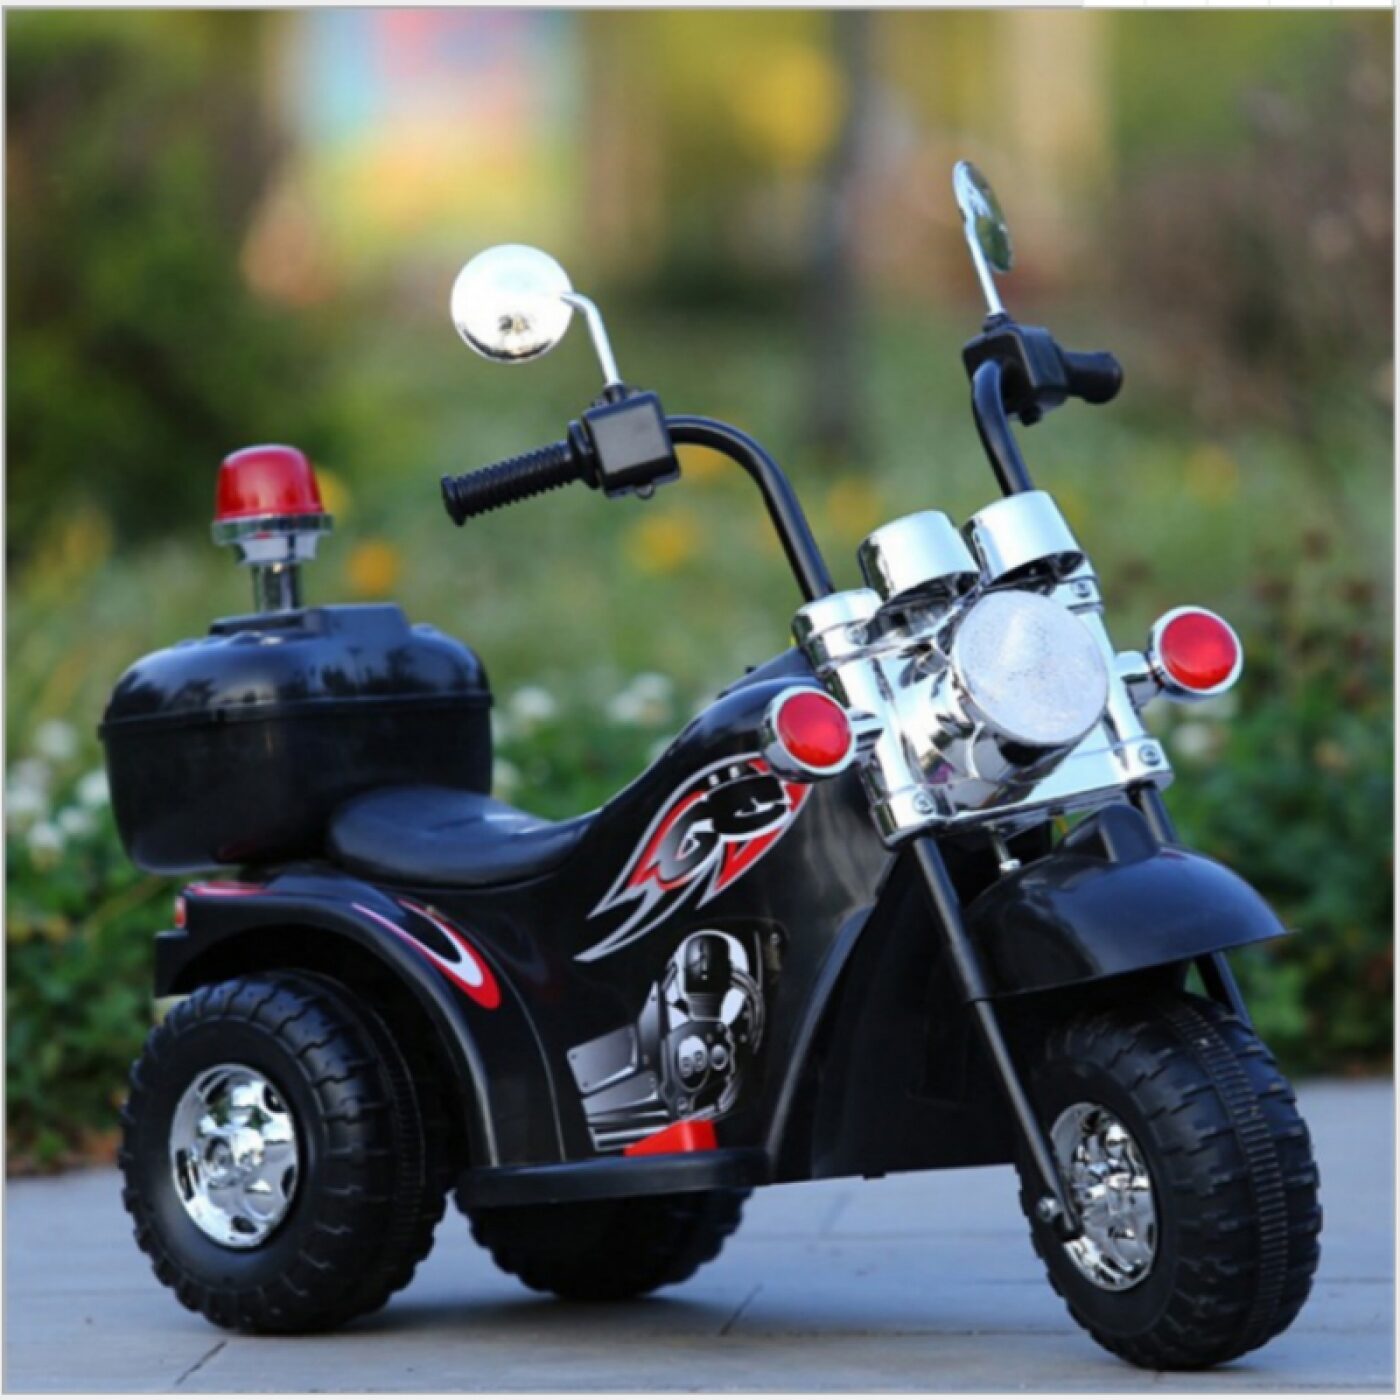 Hot selling plastic kids mini motorcycle toy / electric